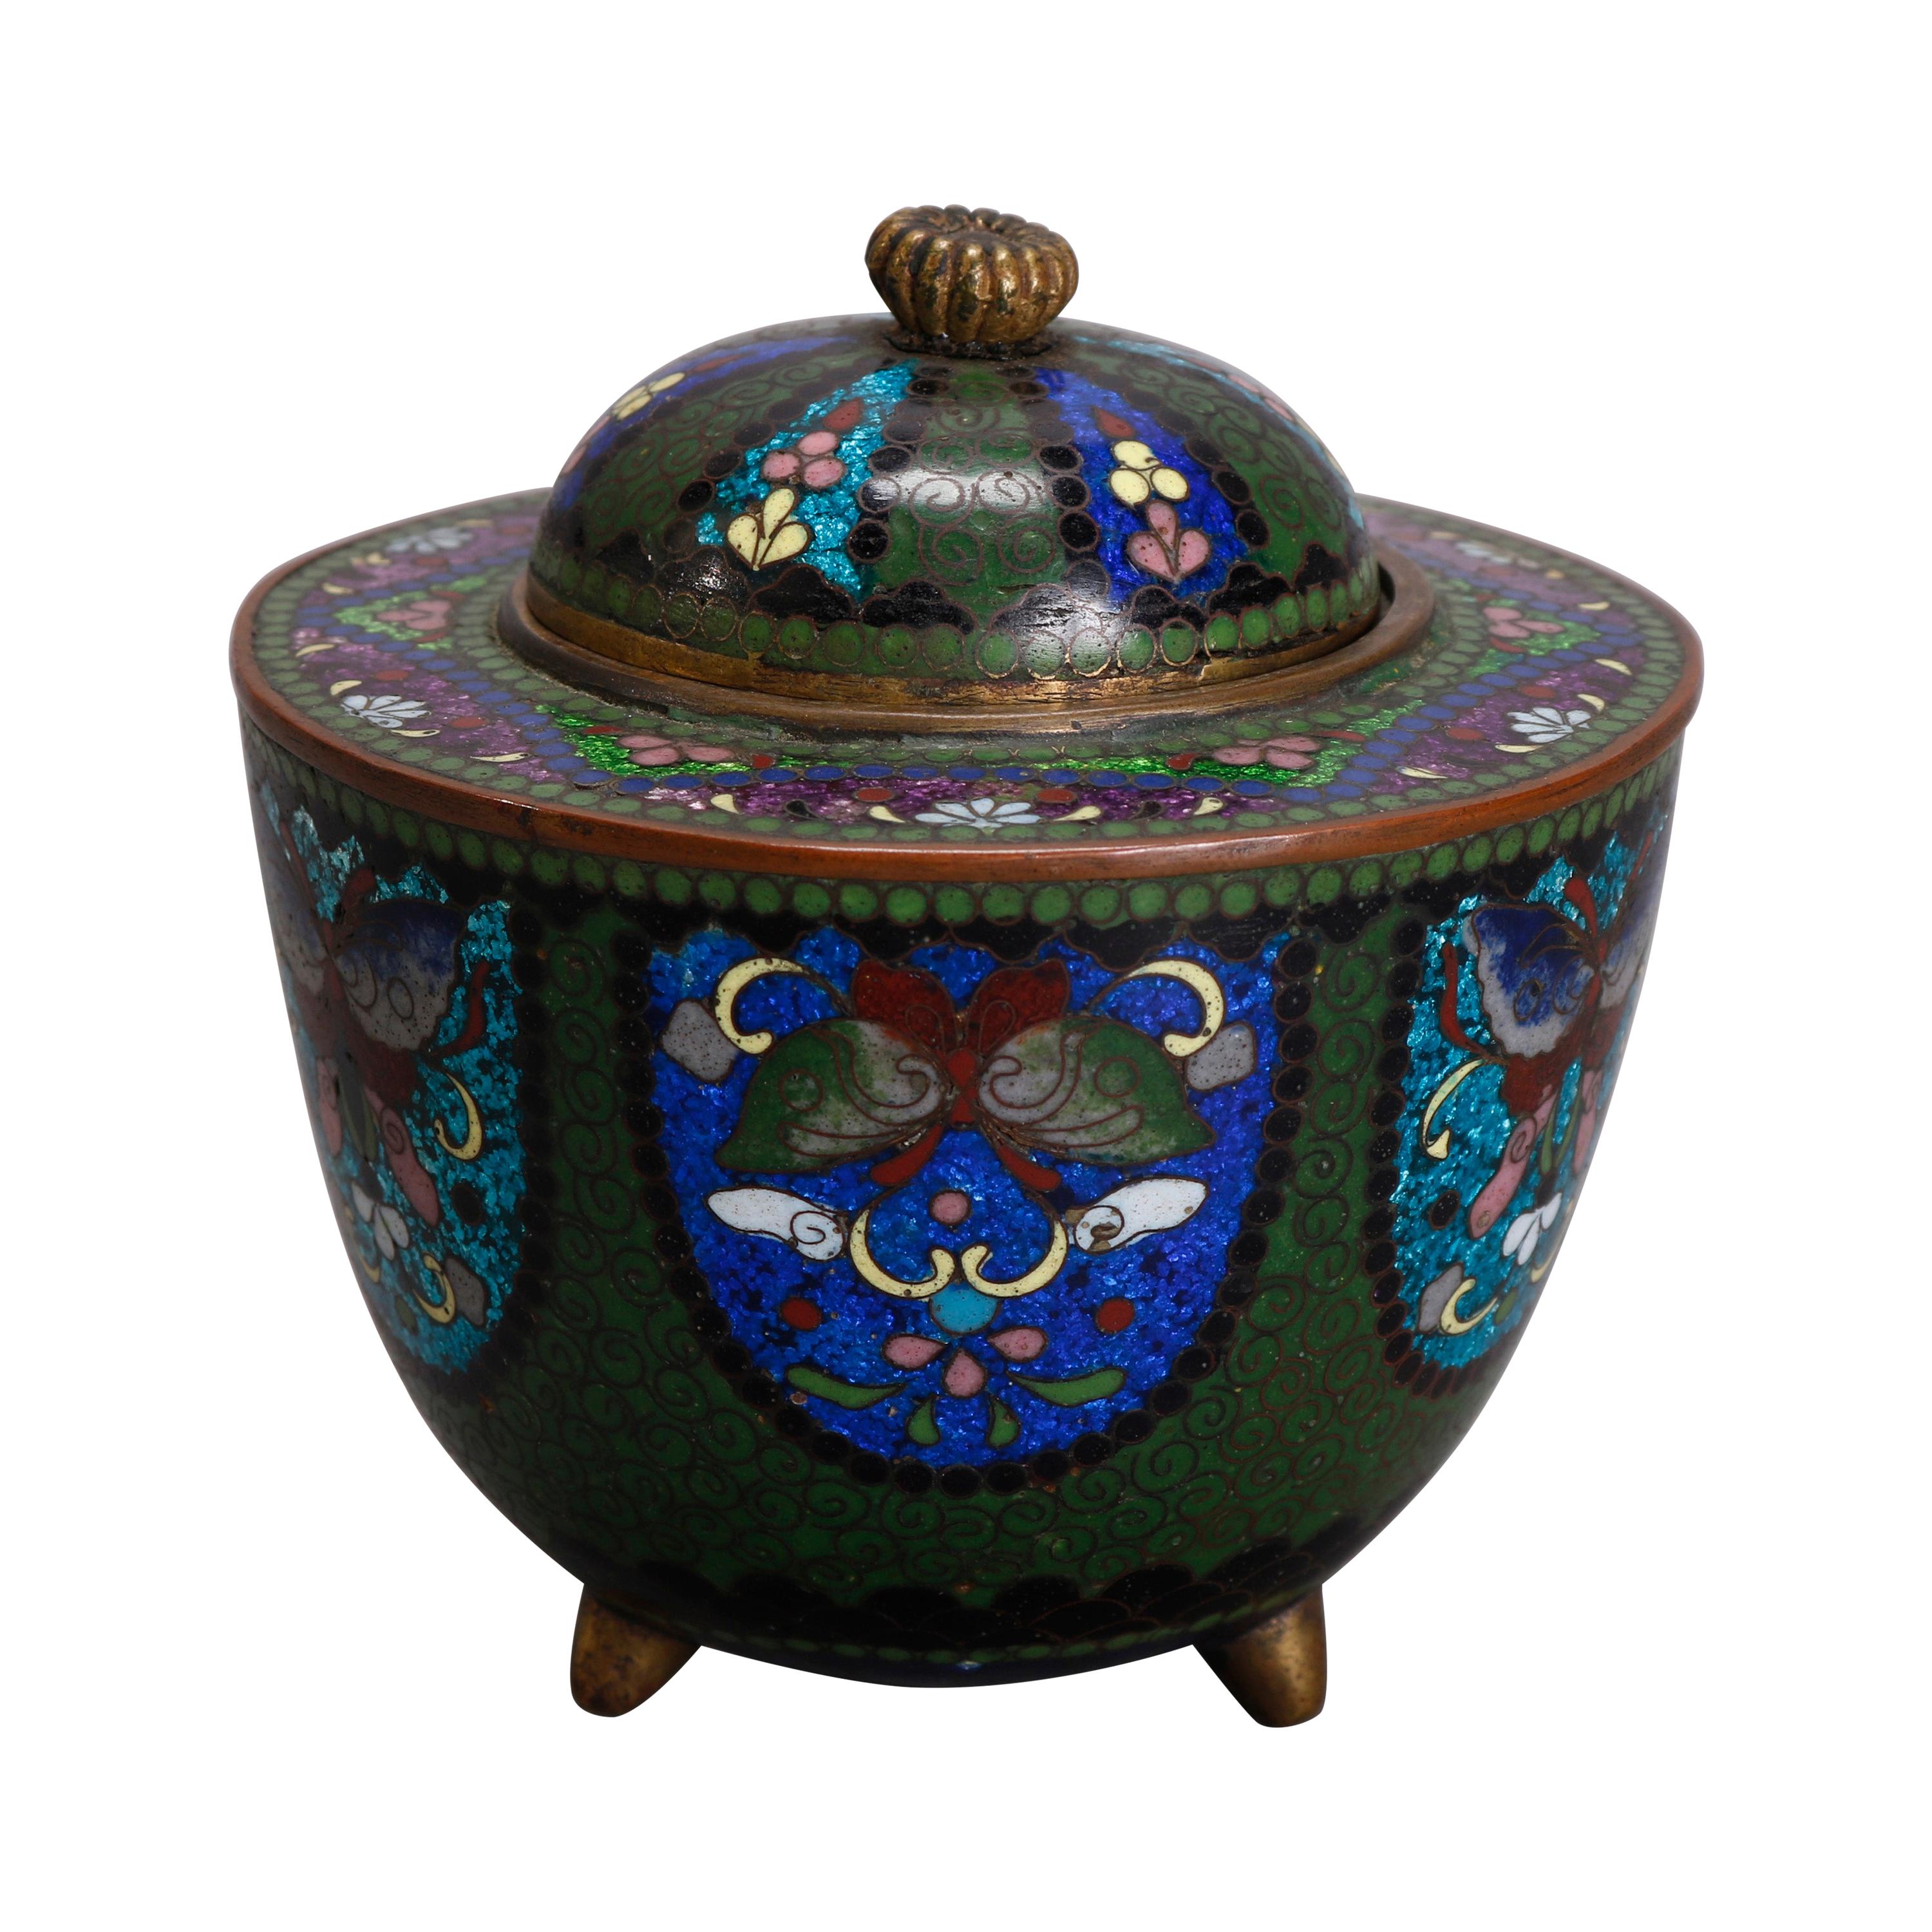 Antique Chinese Butterfly Cloisonne Enameled Lidded Server, circa 1900